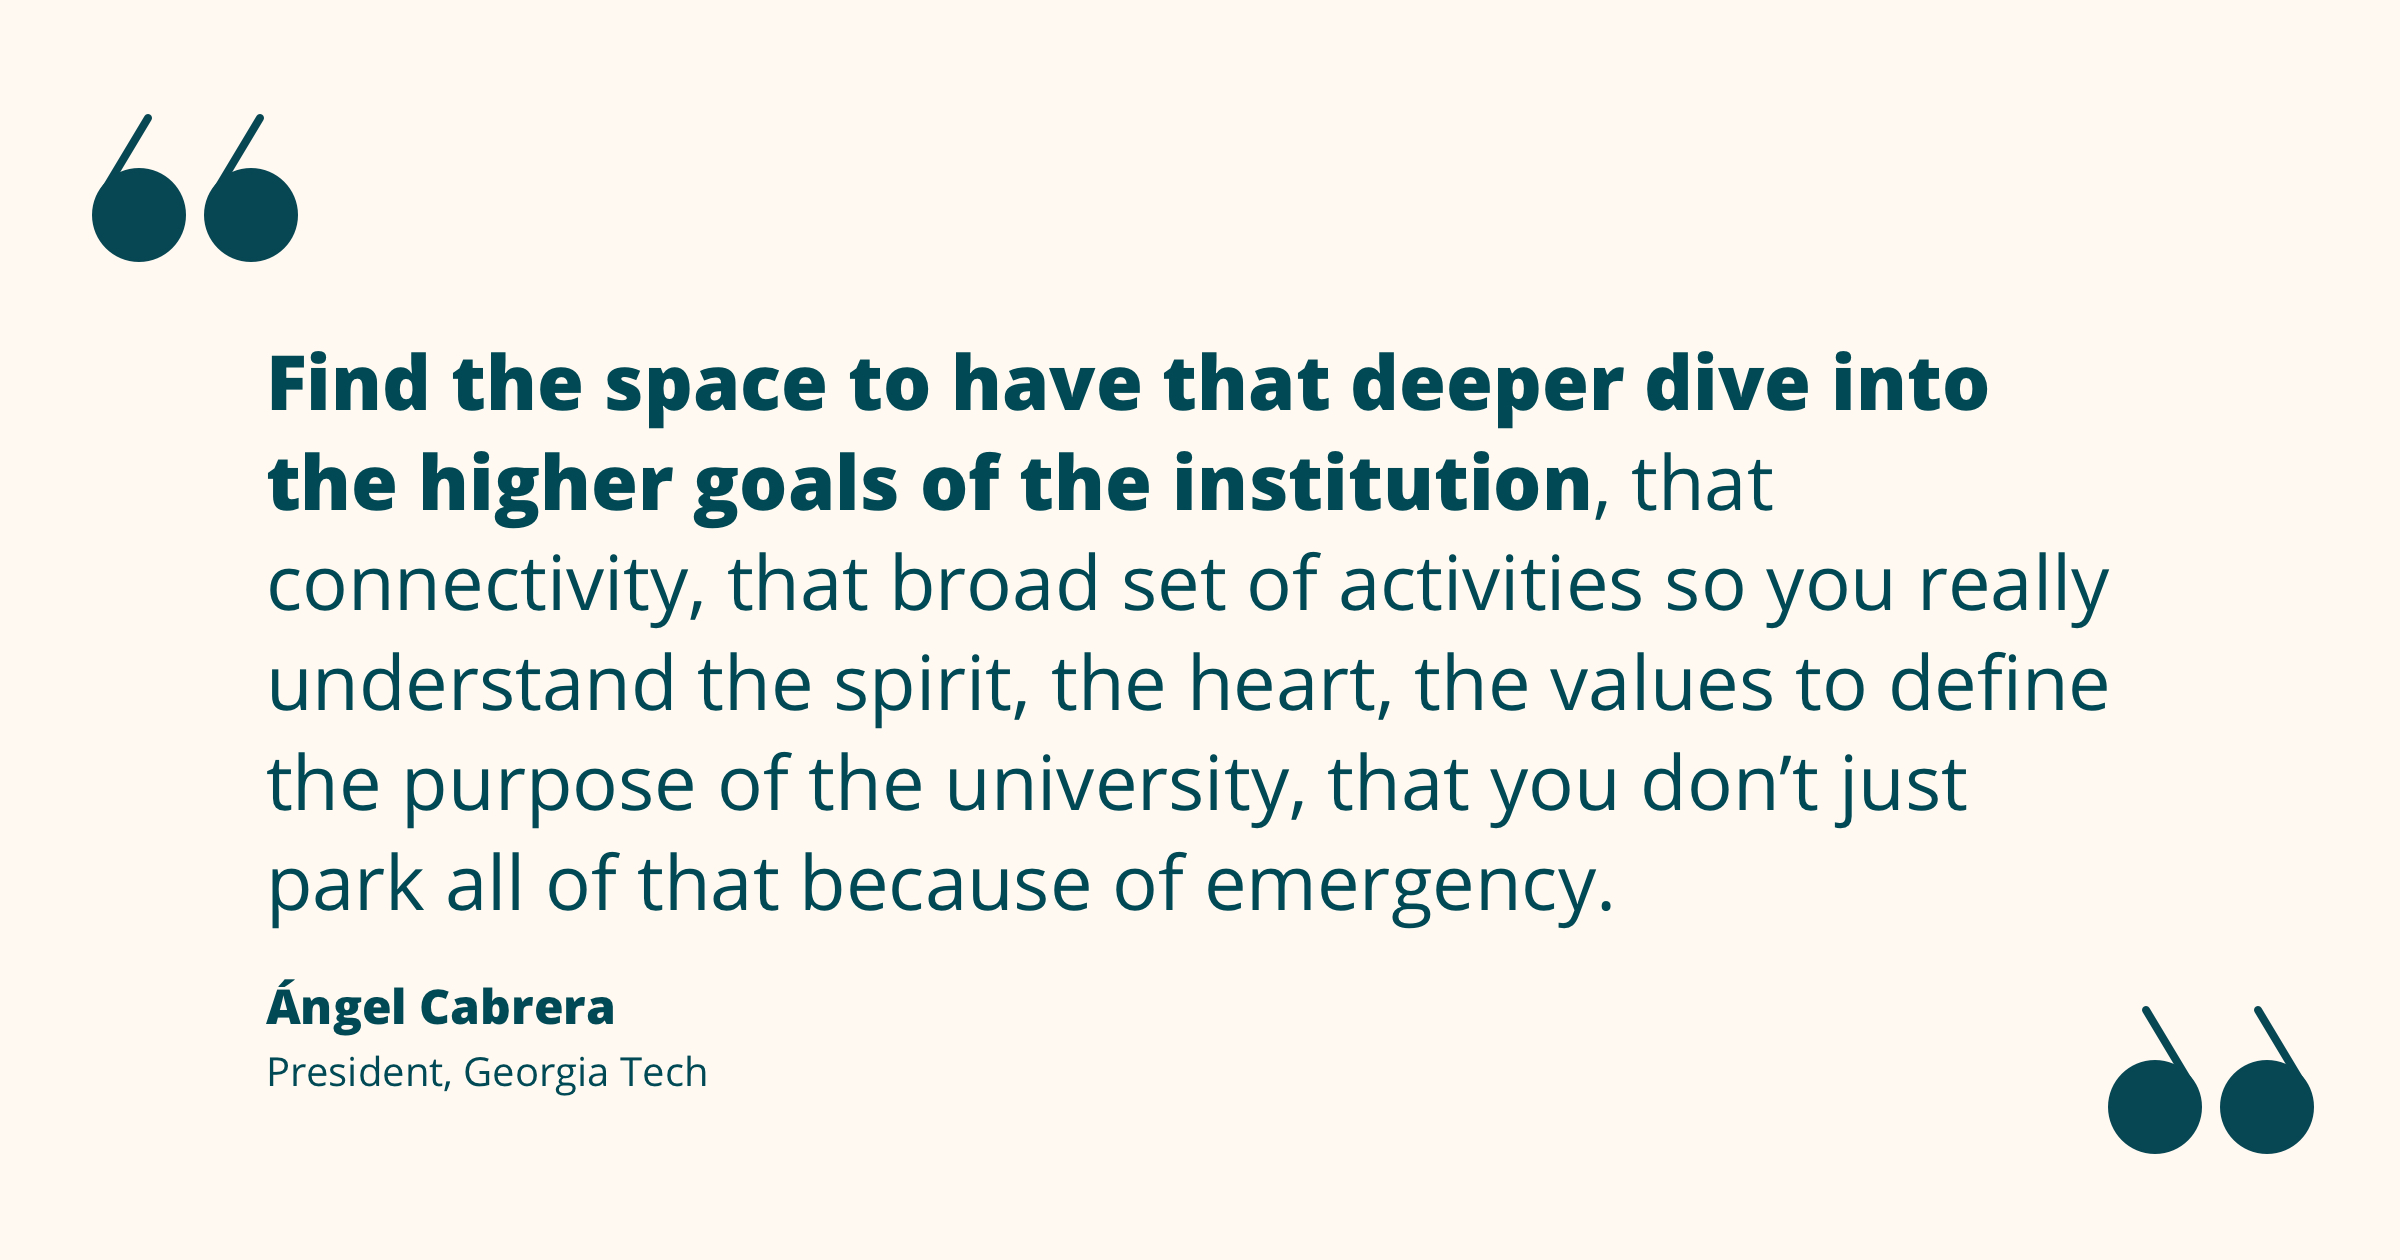 Quote from Angel Cabrera re: defining the university's spirit, heart, values, and purpose, even during an emergency.